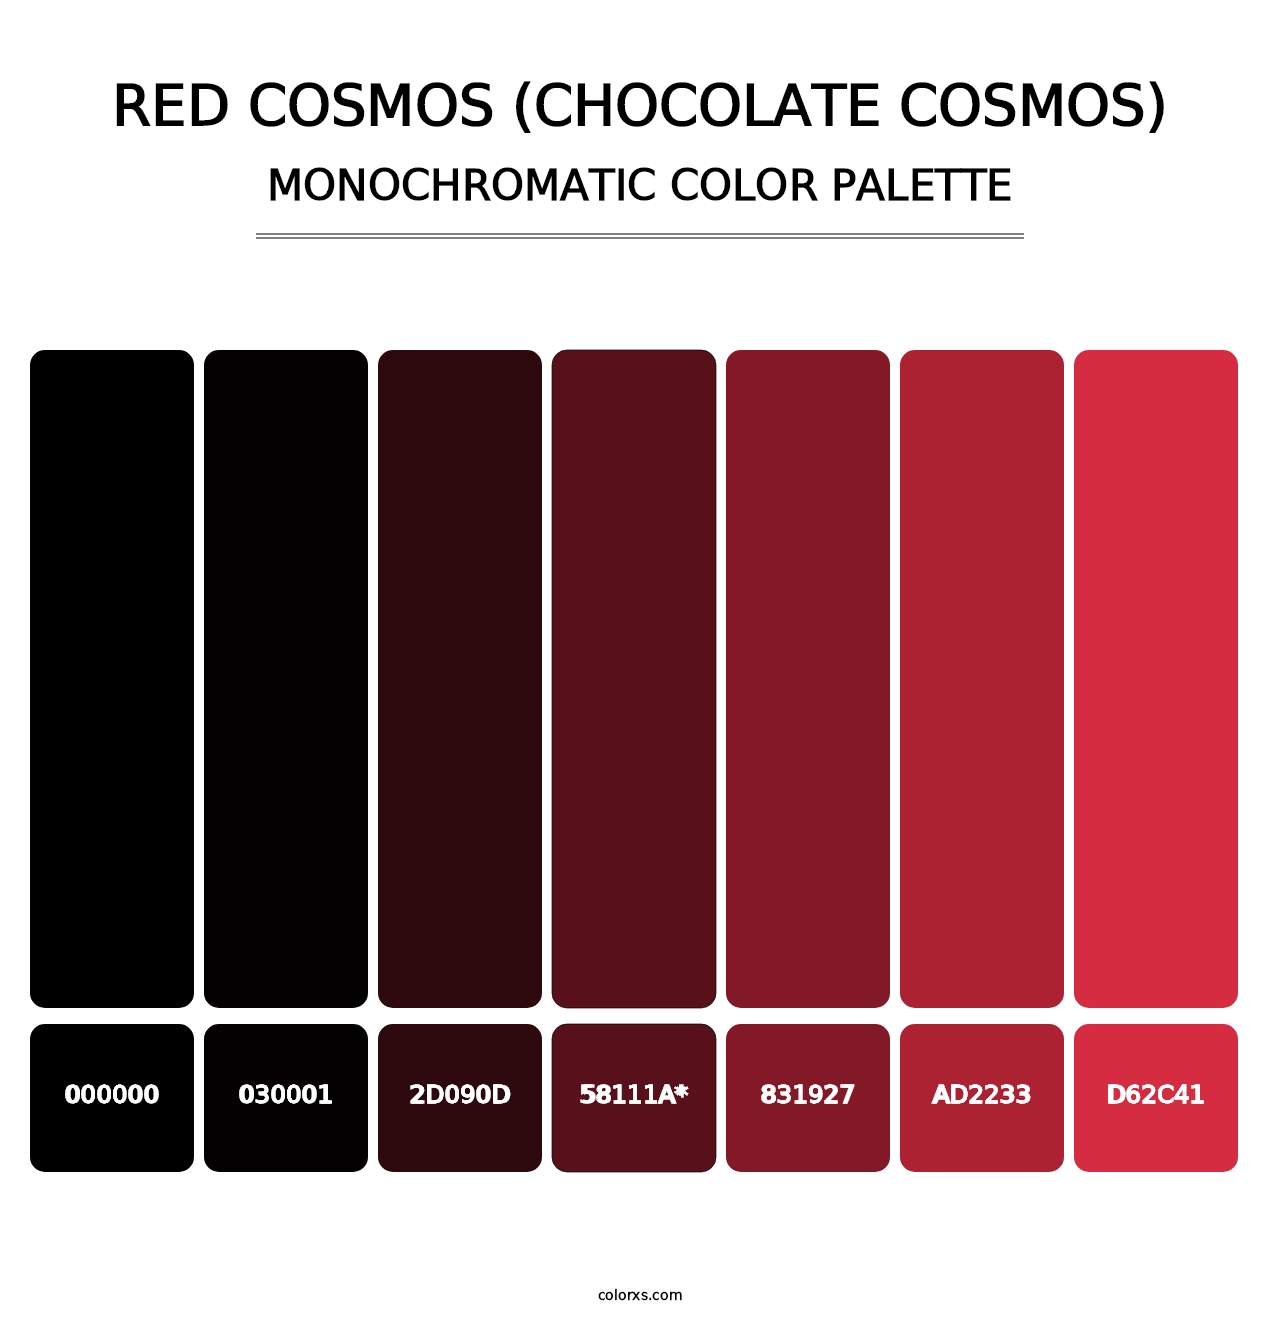 Red Cosmos (Chocolate Cosmos) - Monochromatic Color Palette